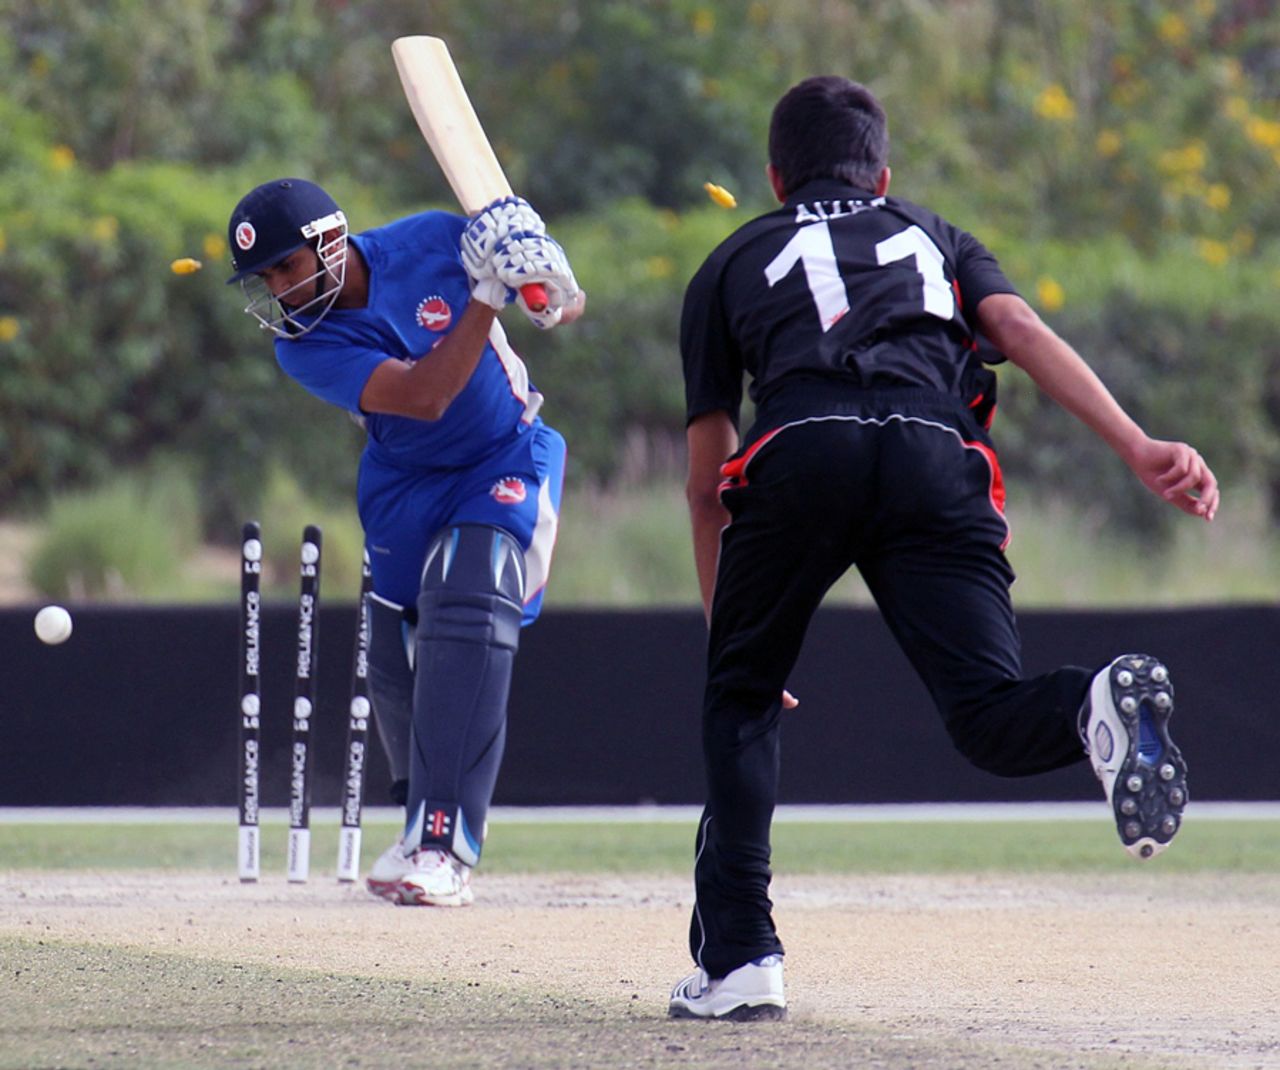 Aizaz Khan cleans up USA's Japen Patel during his spell of 5-25 in the ICC World Twenty20 Qualifier 11th Place Play-off match played at the ICC Global Cricket Academy ground on 23rd March 2012